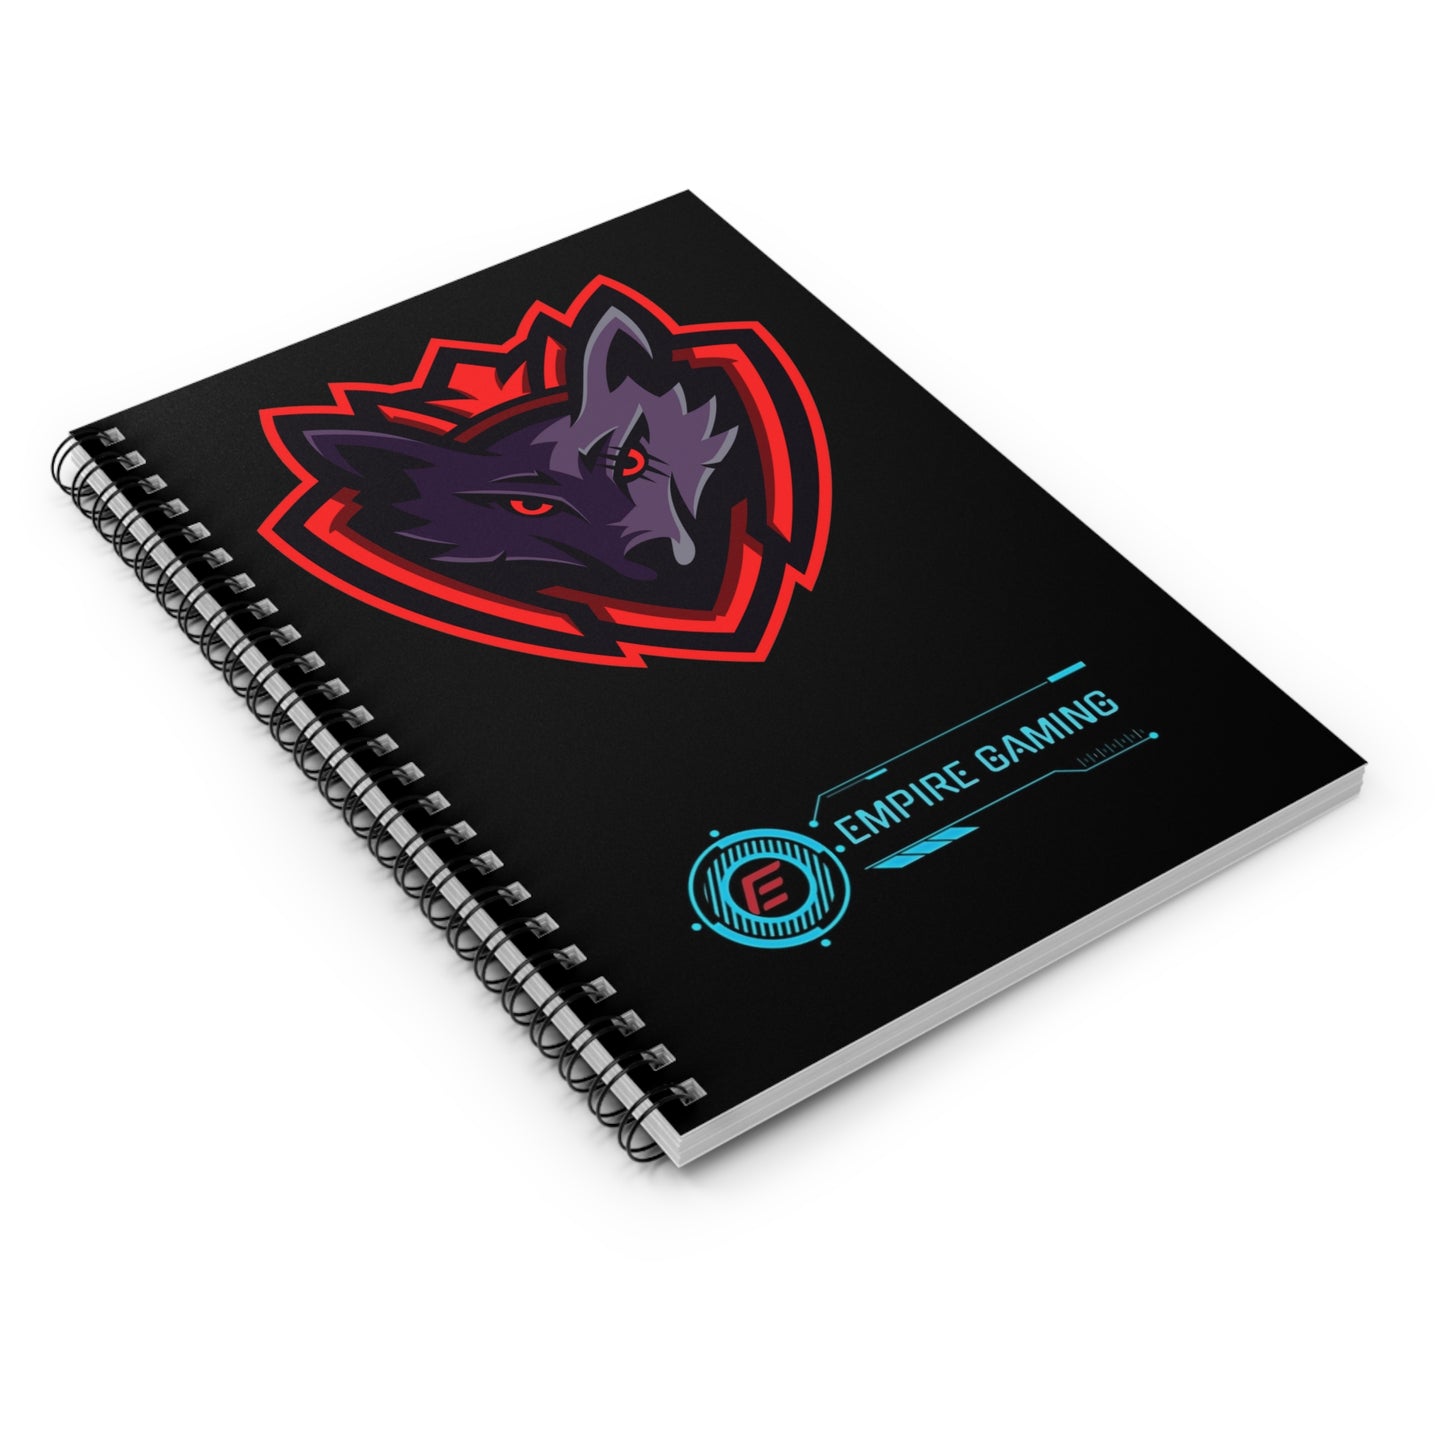 Empire Spiral Notebook - Ruled Line